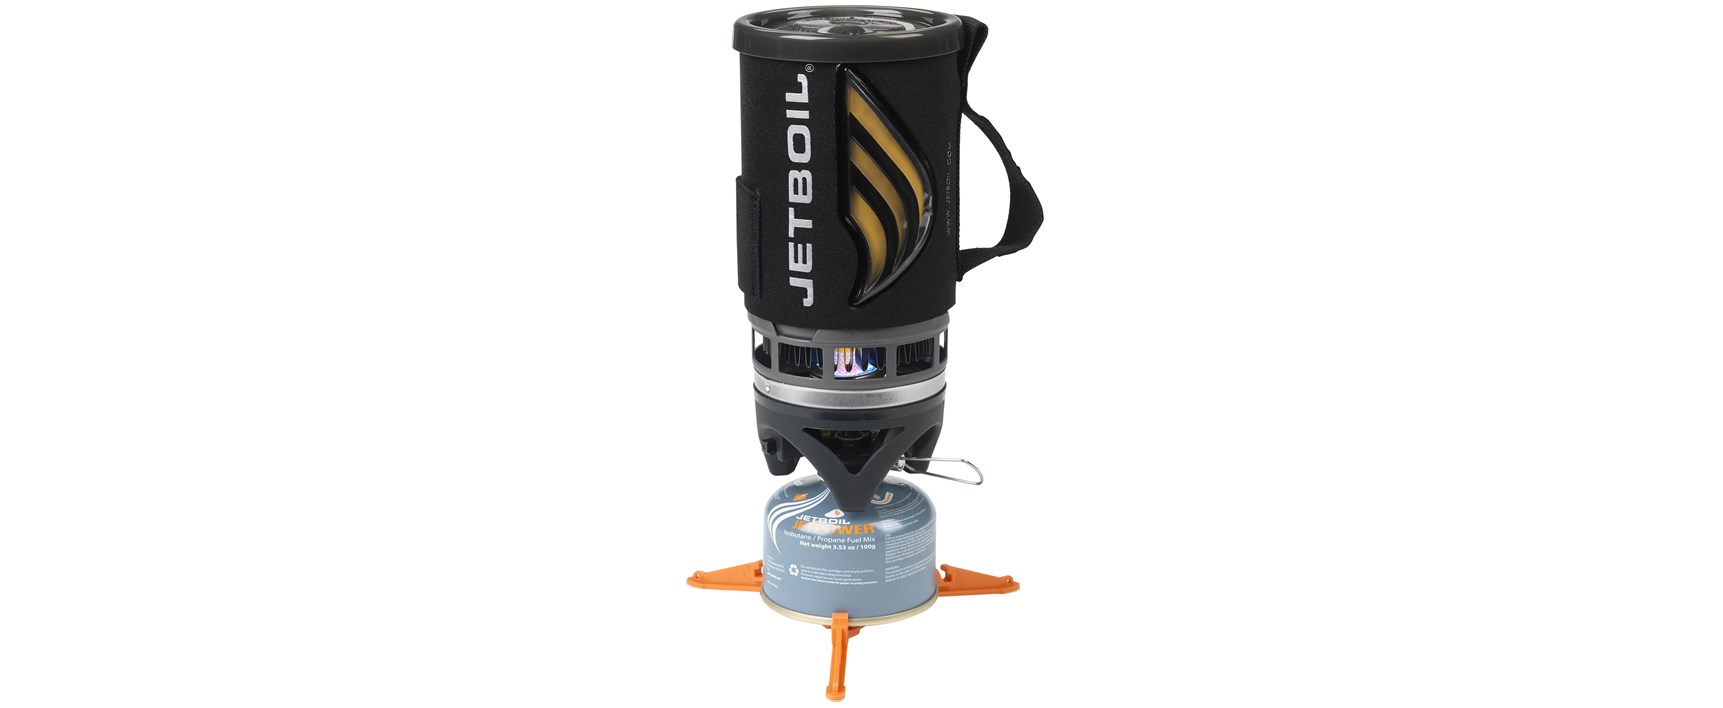 JetBoil Flash Cooking System